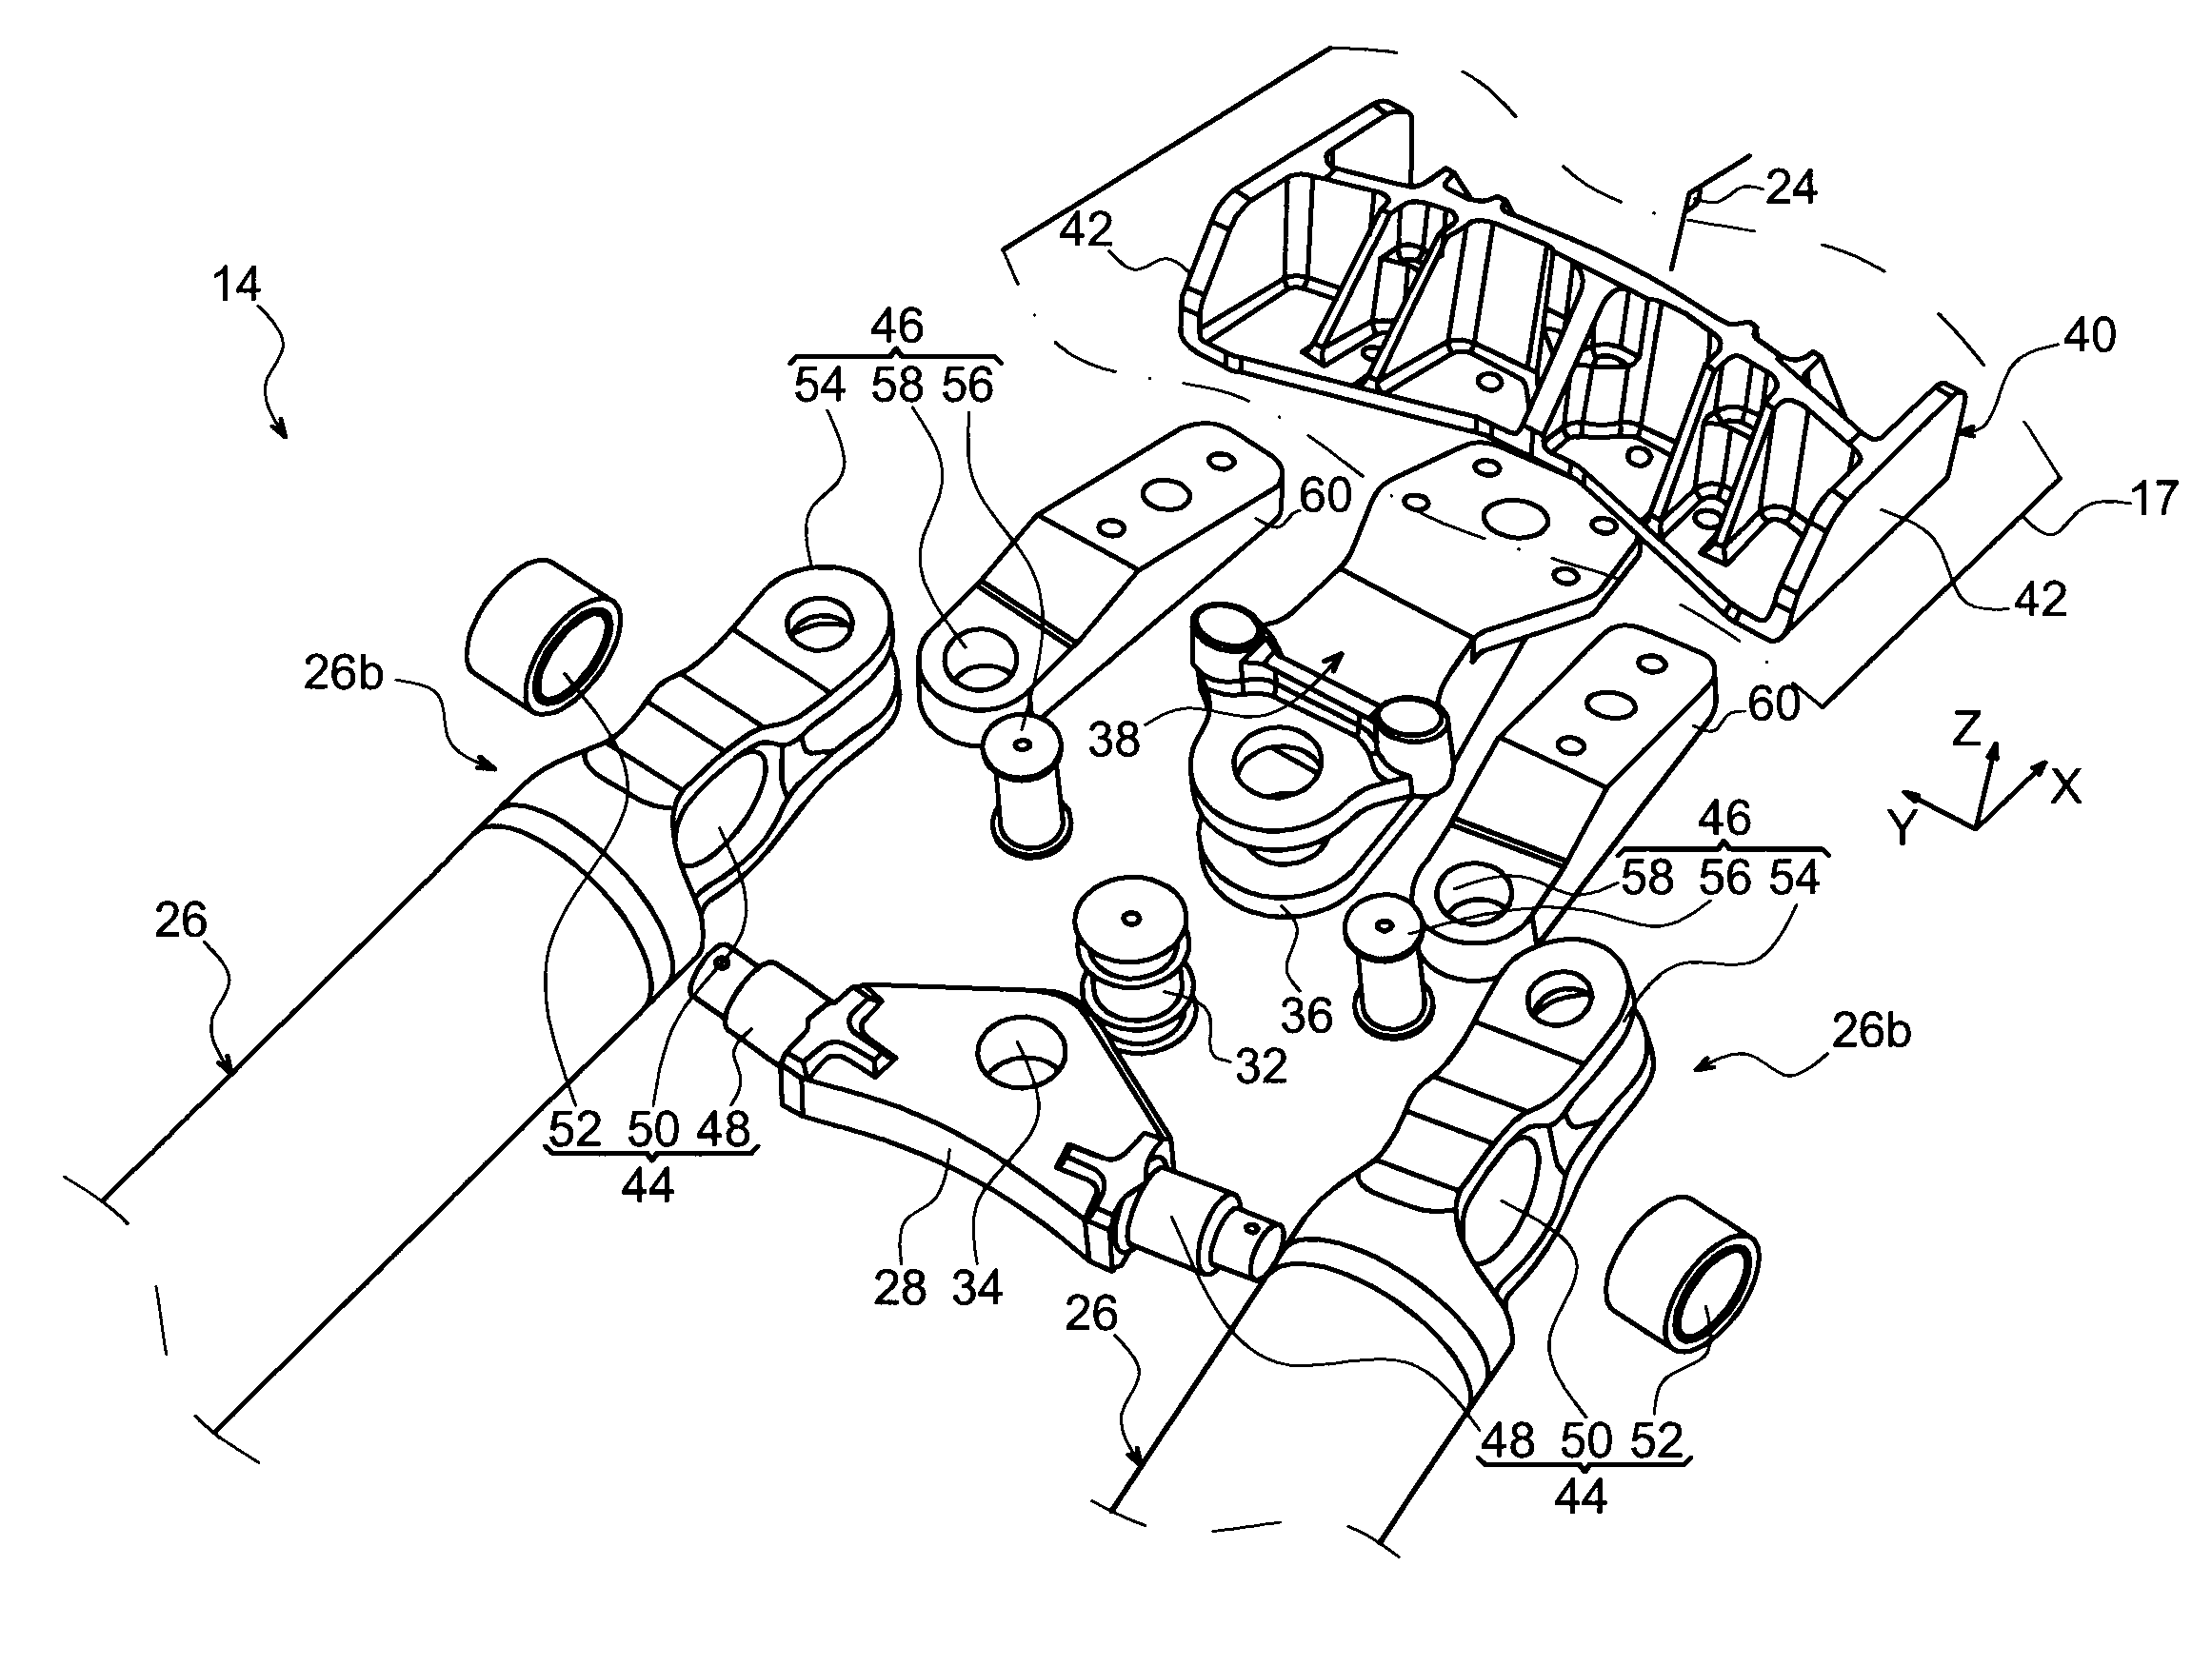 Mounting device for an aircraft engine comprising two thrust recovery rods with a double rear mechanical connection